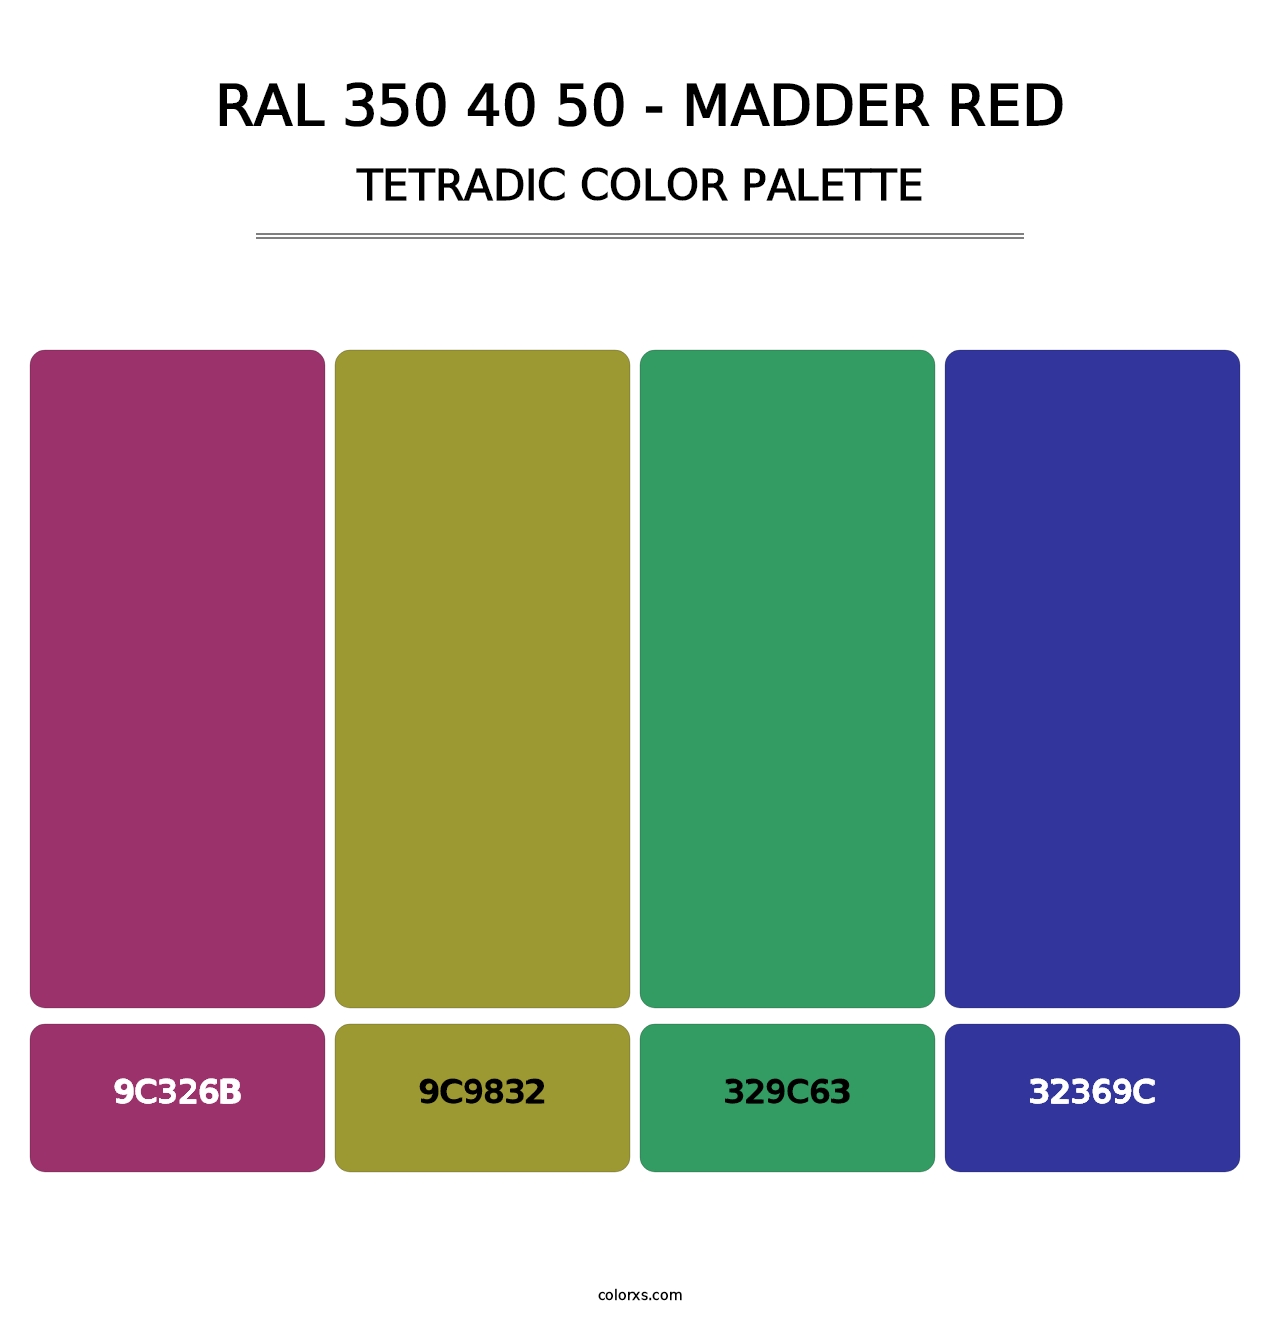 RAL 350 40 50 - Madder Red - Tetradic Color Palette